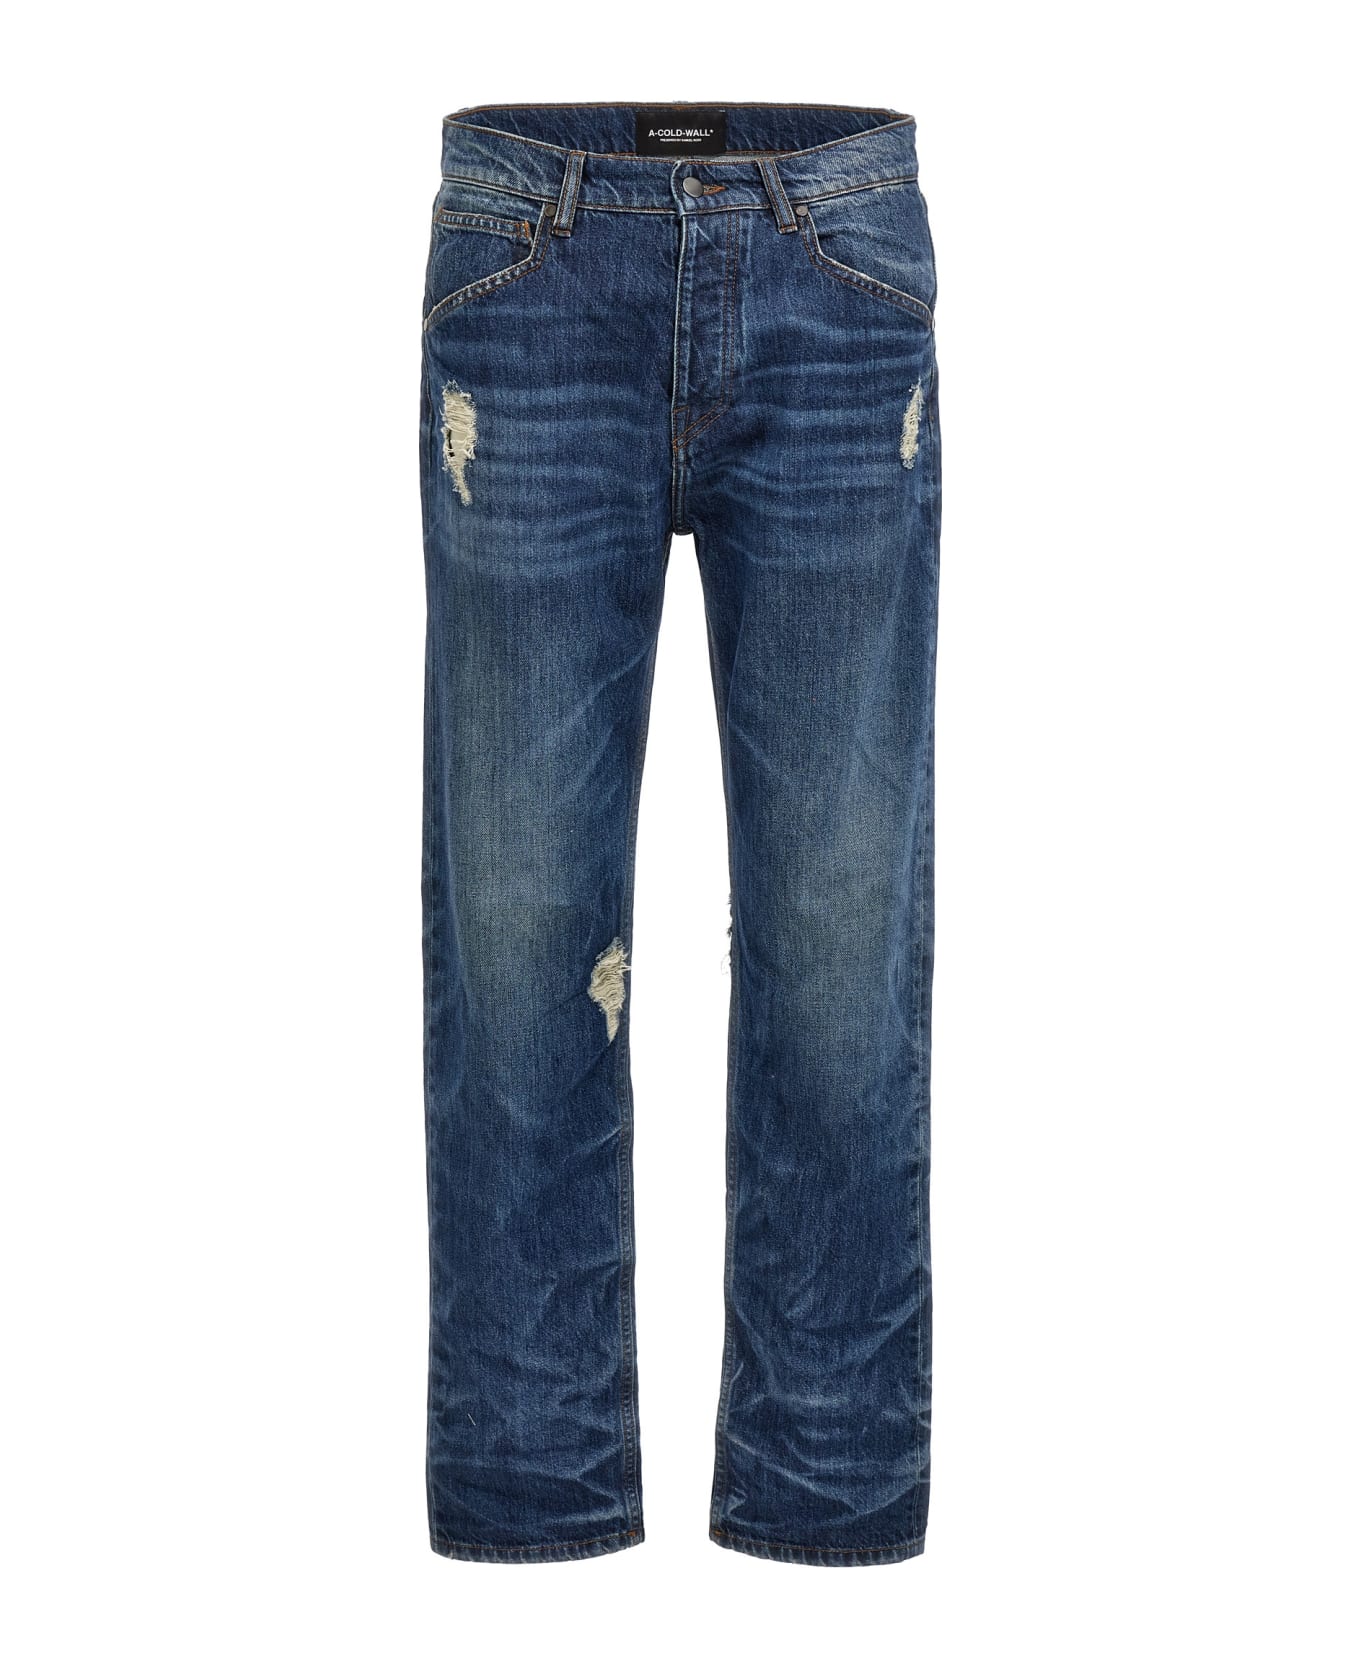 A-COLD-WALL 'foundry' Jeans - Blue